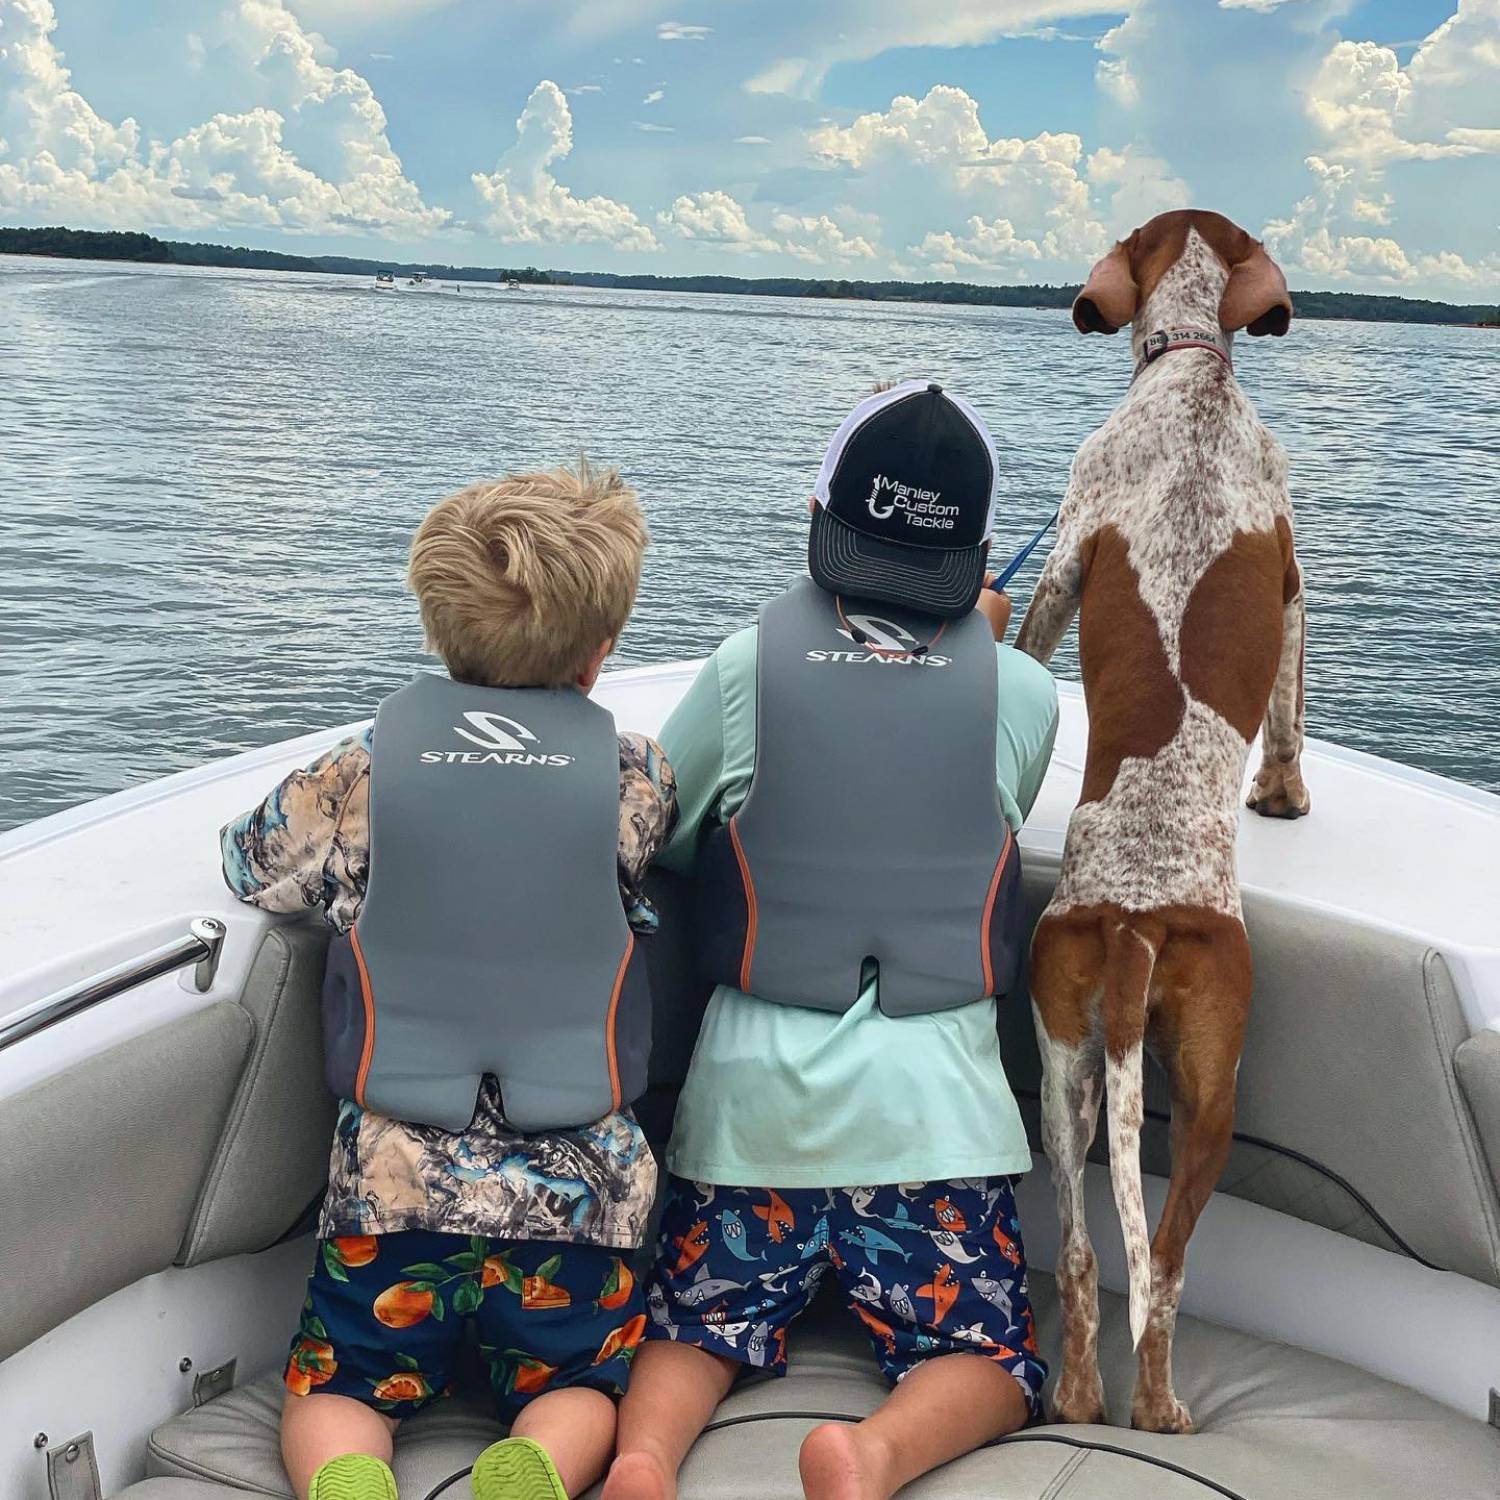 Title: The three amigos - On board their Sportsman Heritage 231 Center Console - Location: Lake Hartwell, Clemson Sc. Participating in the Photo Contest #SportsmanAugust